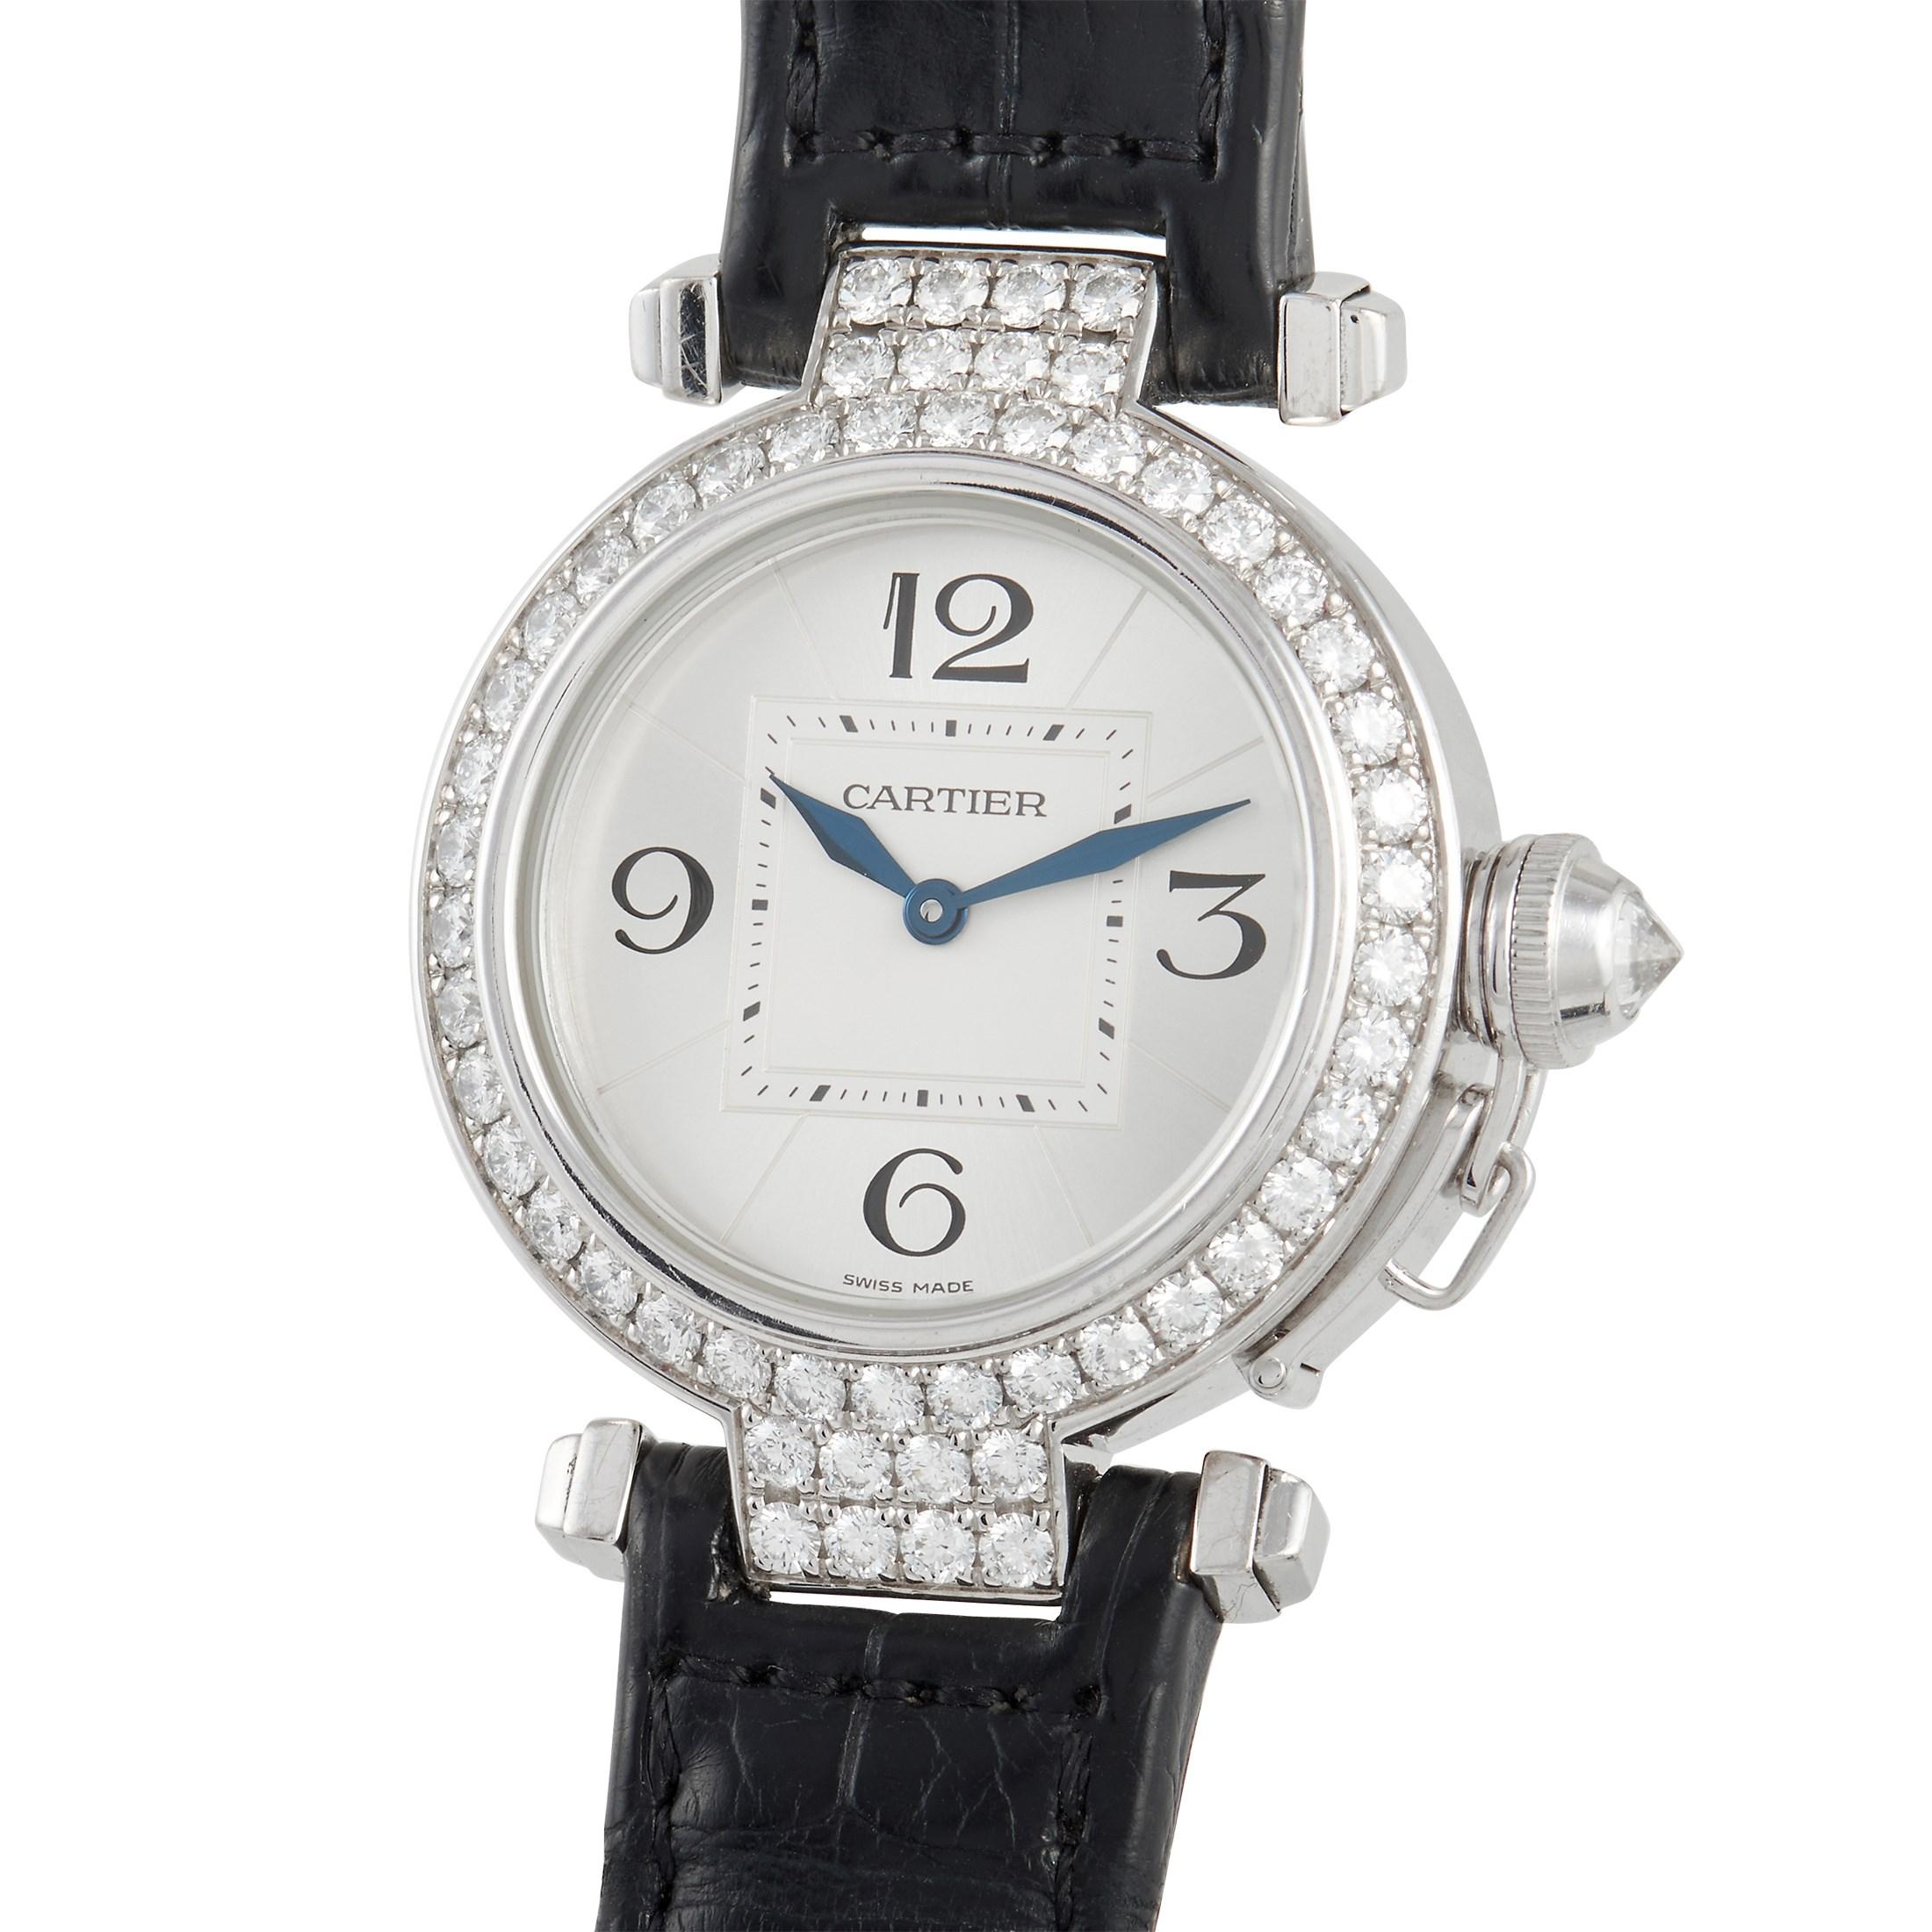 The Cartier Pasha Diamond Ladies Watch, reference number 2813, is the picture of elegance. 

The beauty of this ladies watch, begins with the 32mm case made from 18K White Gold, which provides the perfect backdrop for a bezel covered in glittering